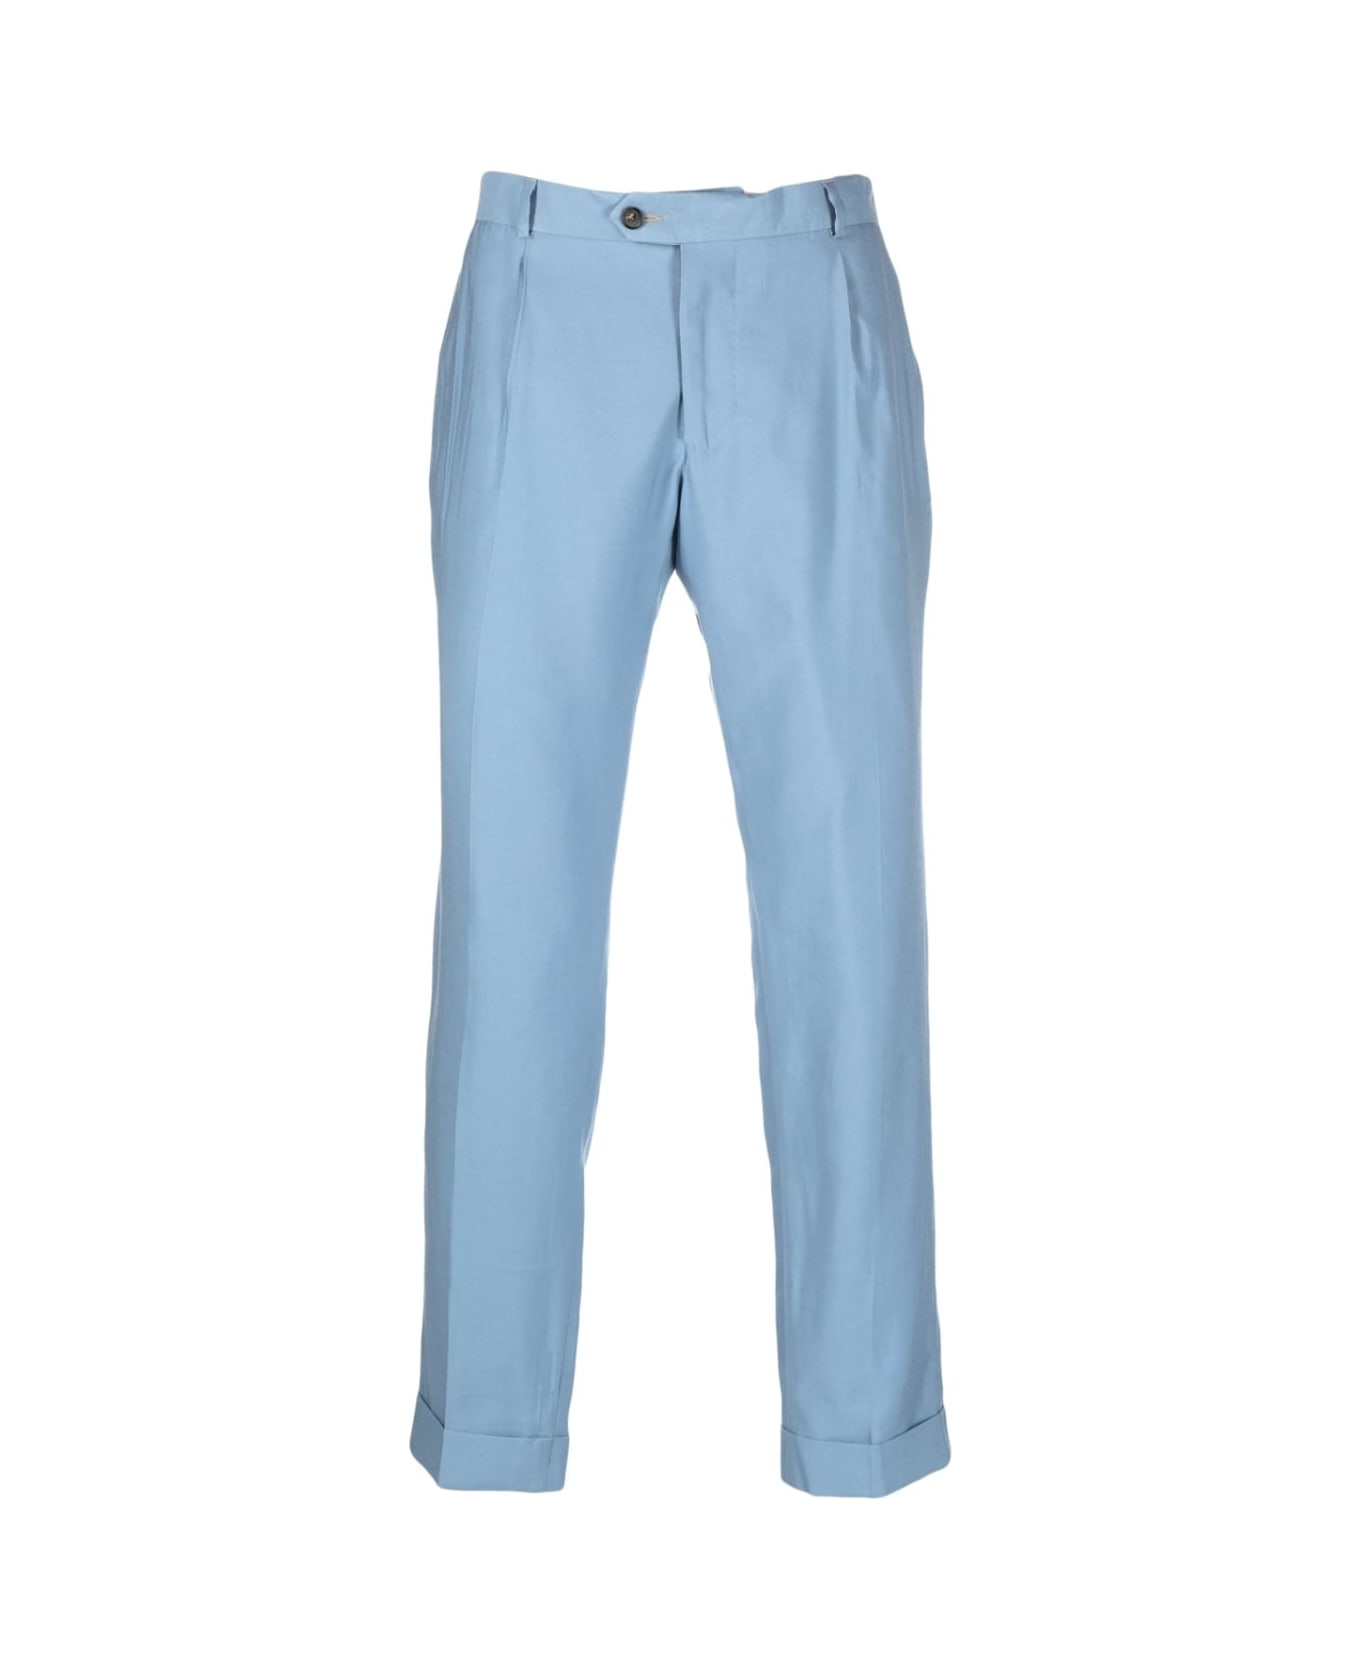 Reveres 1949 Straight Leg Tailored Trousers With Pressed Crease In Light-blue Viscose Man - Light blue